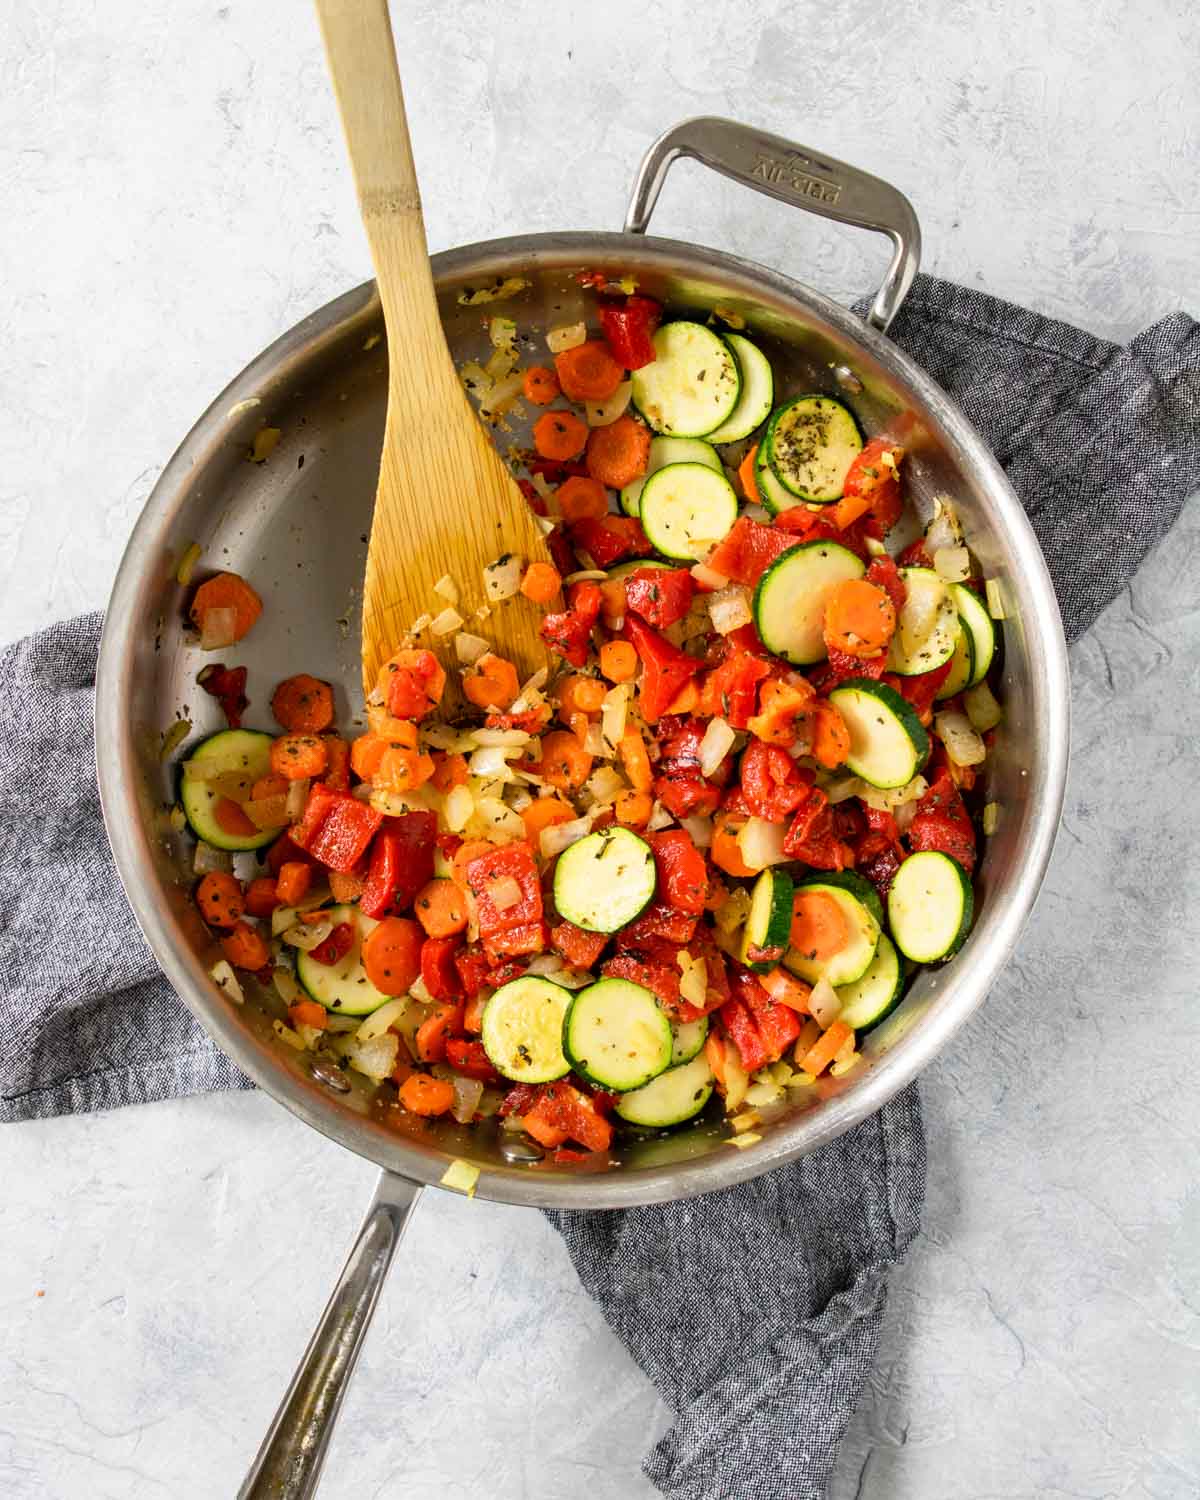 saute pan with carrots, onions, zucchini, roasted red peppers, and garlic